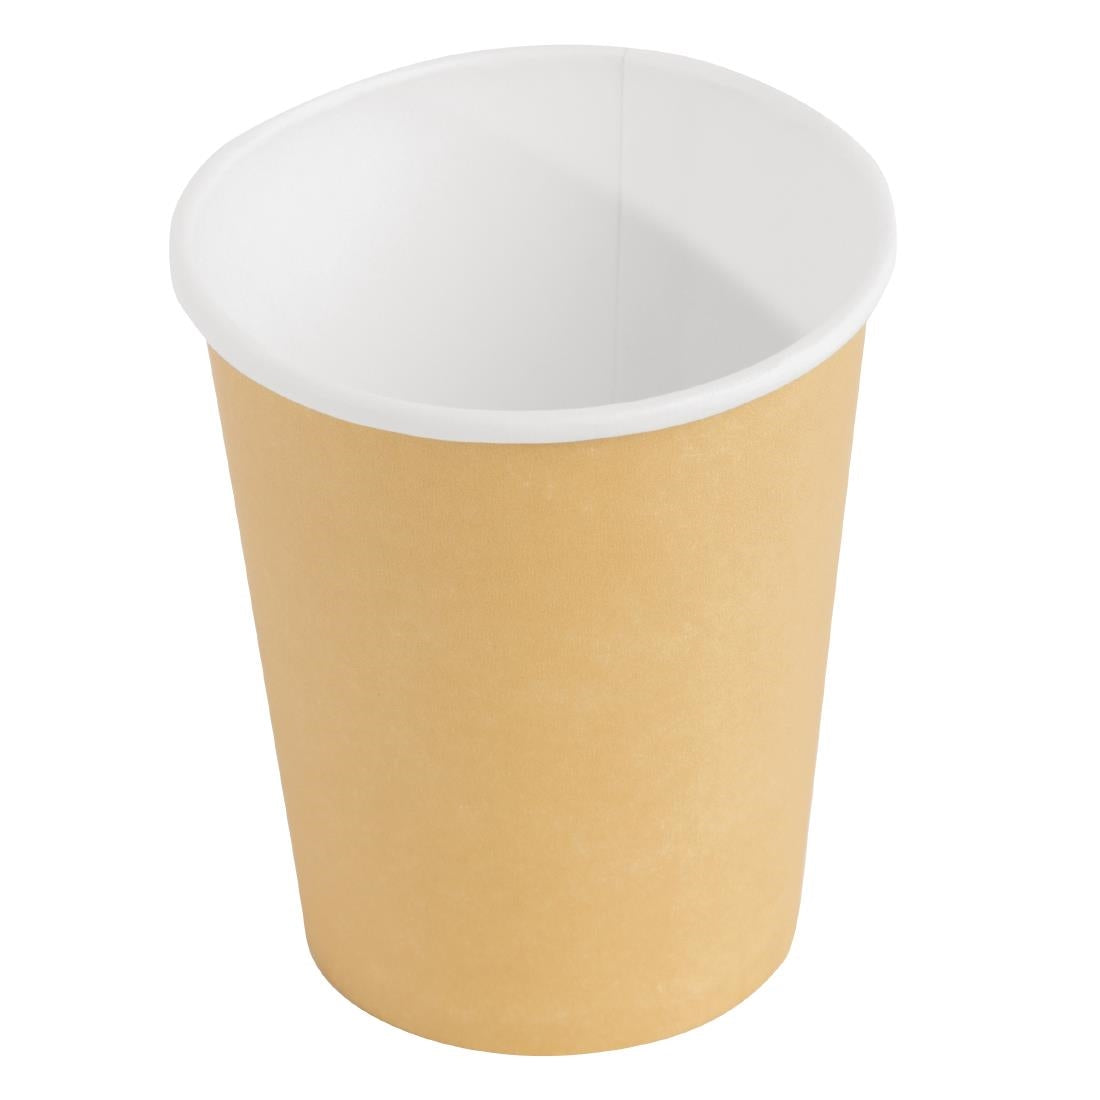 GF031 Fiesta Recyclable Coffee Cups Single Wall Kraft 225ml / 8oz (Pack of 50) JD Catering Equipment Solutions Ltd